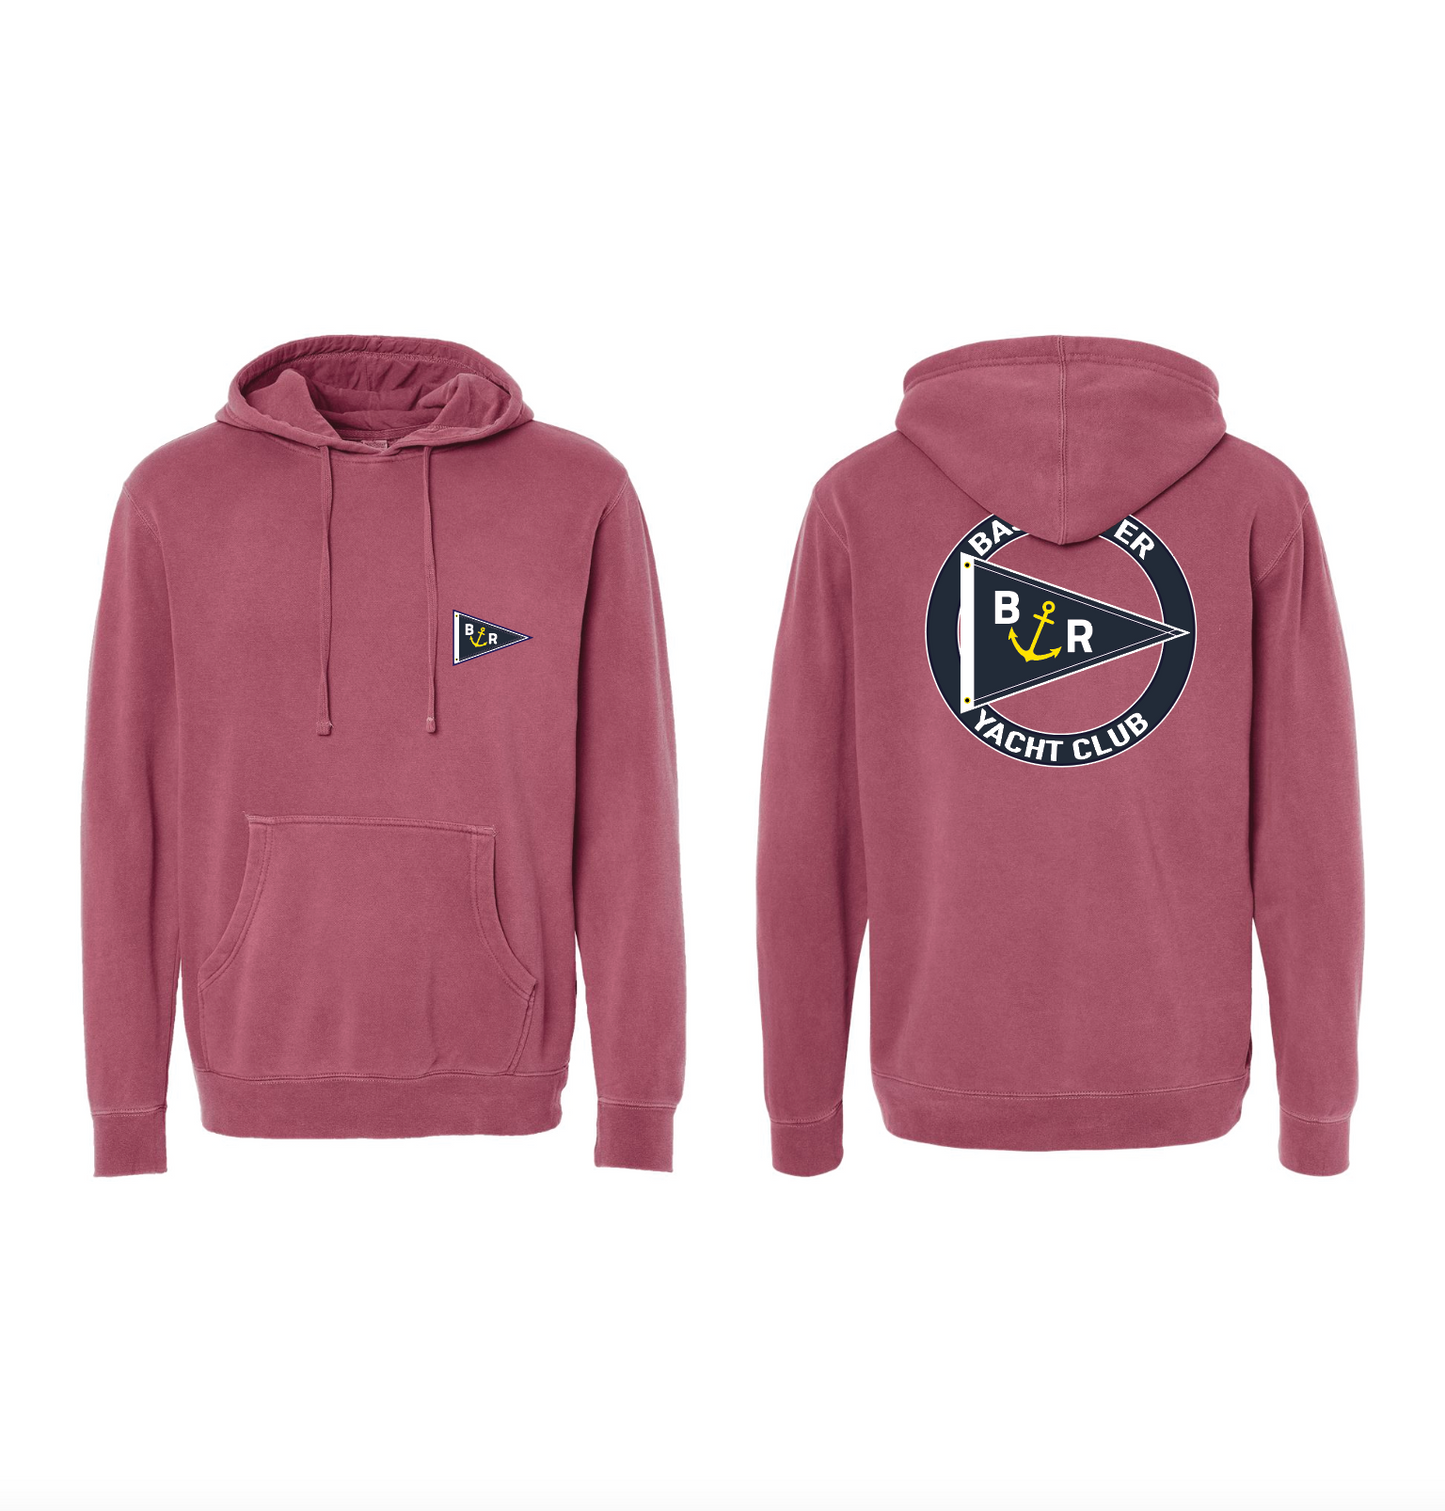 Bass River Yacht Club - Midweight Pigment-Dyed Hooded Sweatshirt